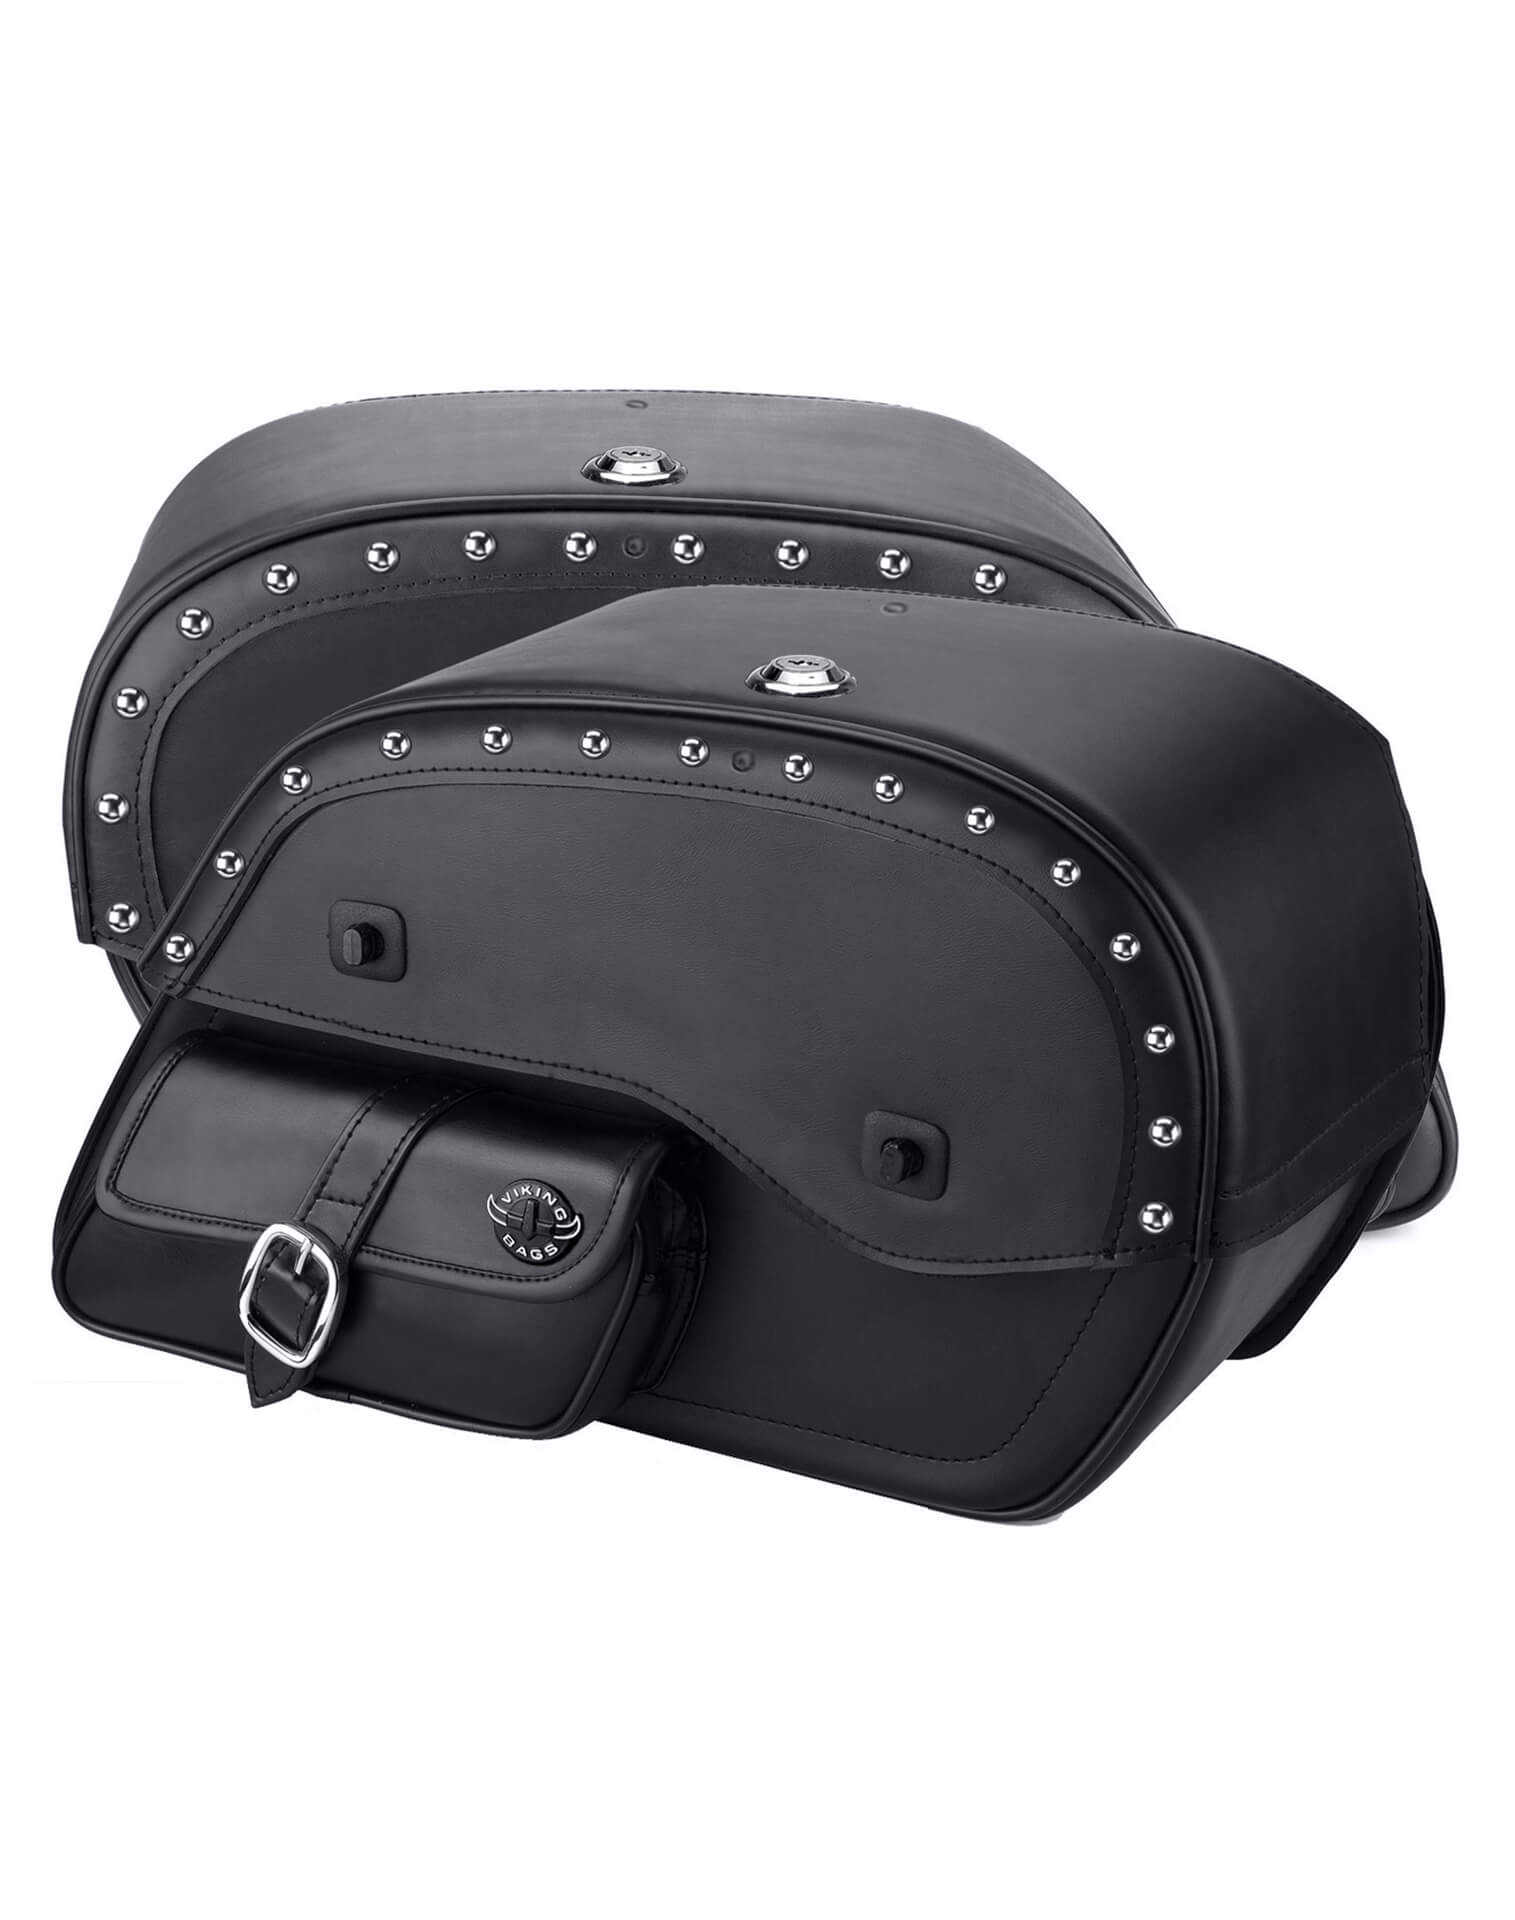 Viking Side Pocket Large Studded Leather Motorcycle Saddlebags for Harley Softail Low Rider S FXLRS Both Bags View